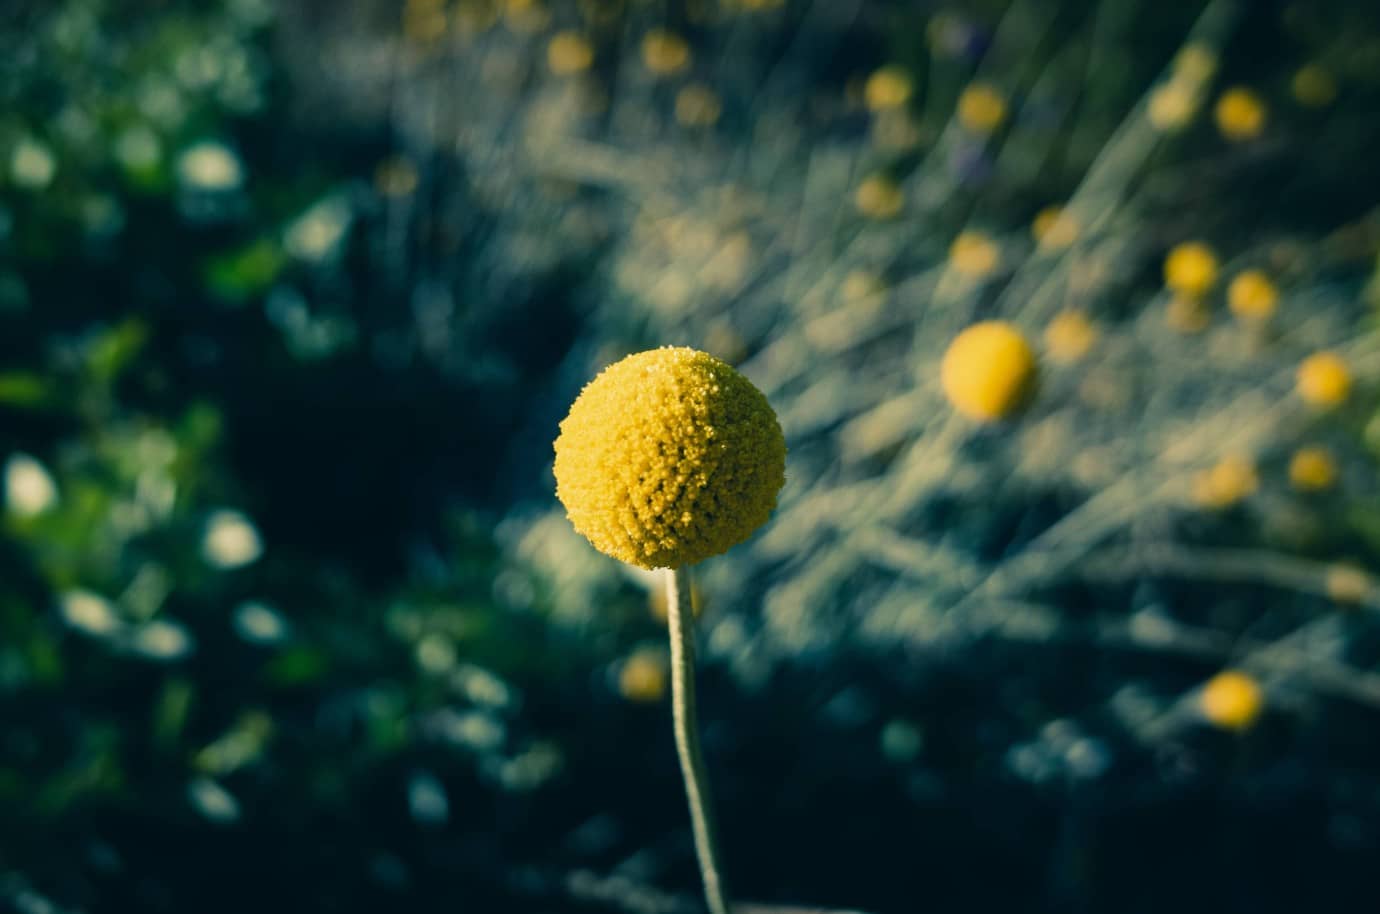 Billy Buttons